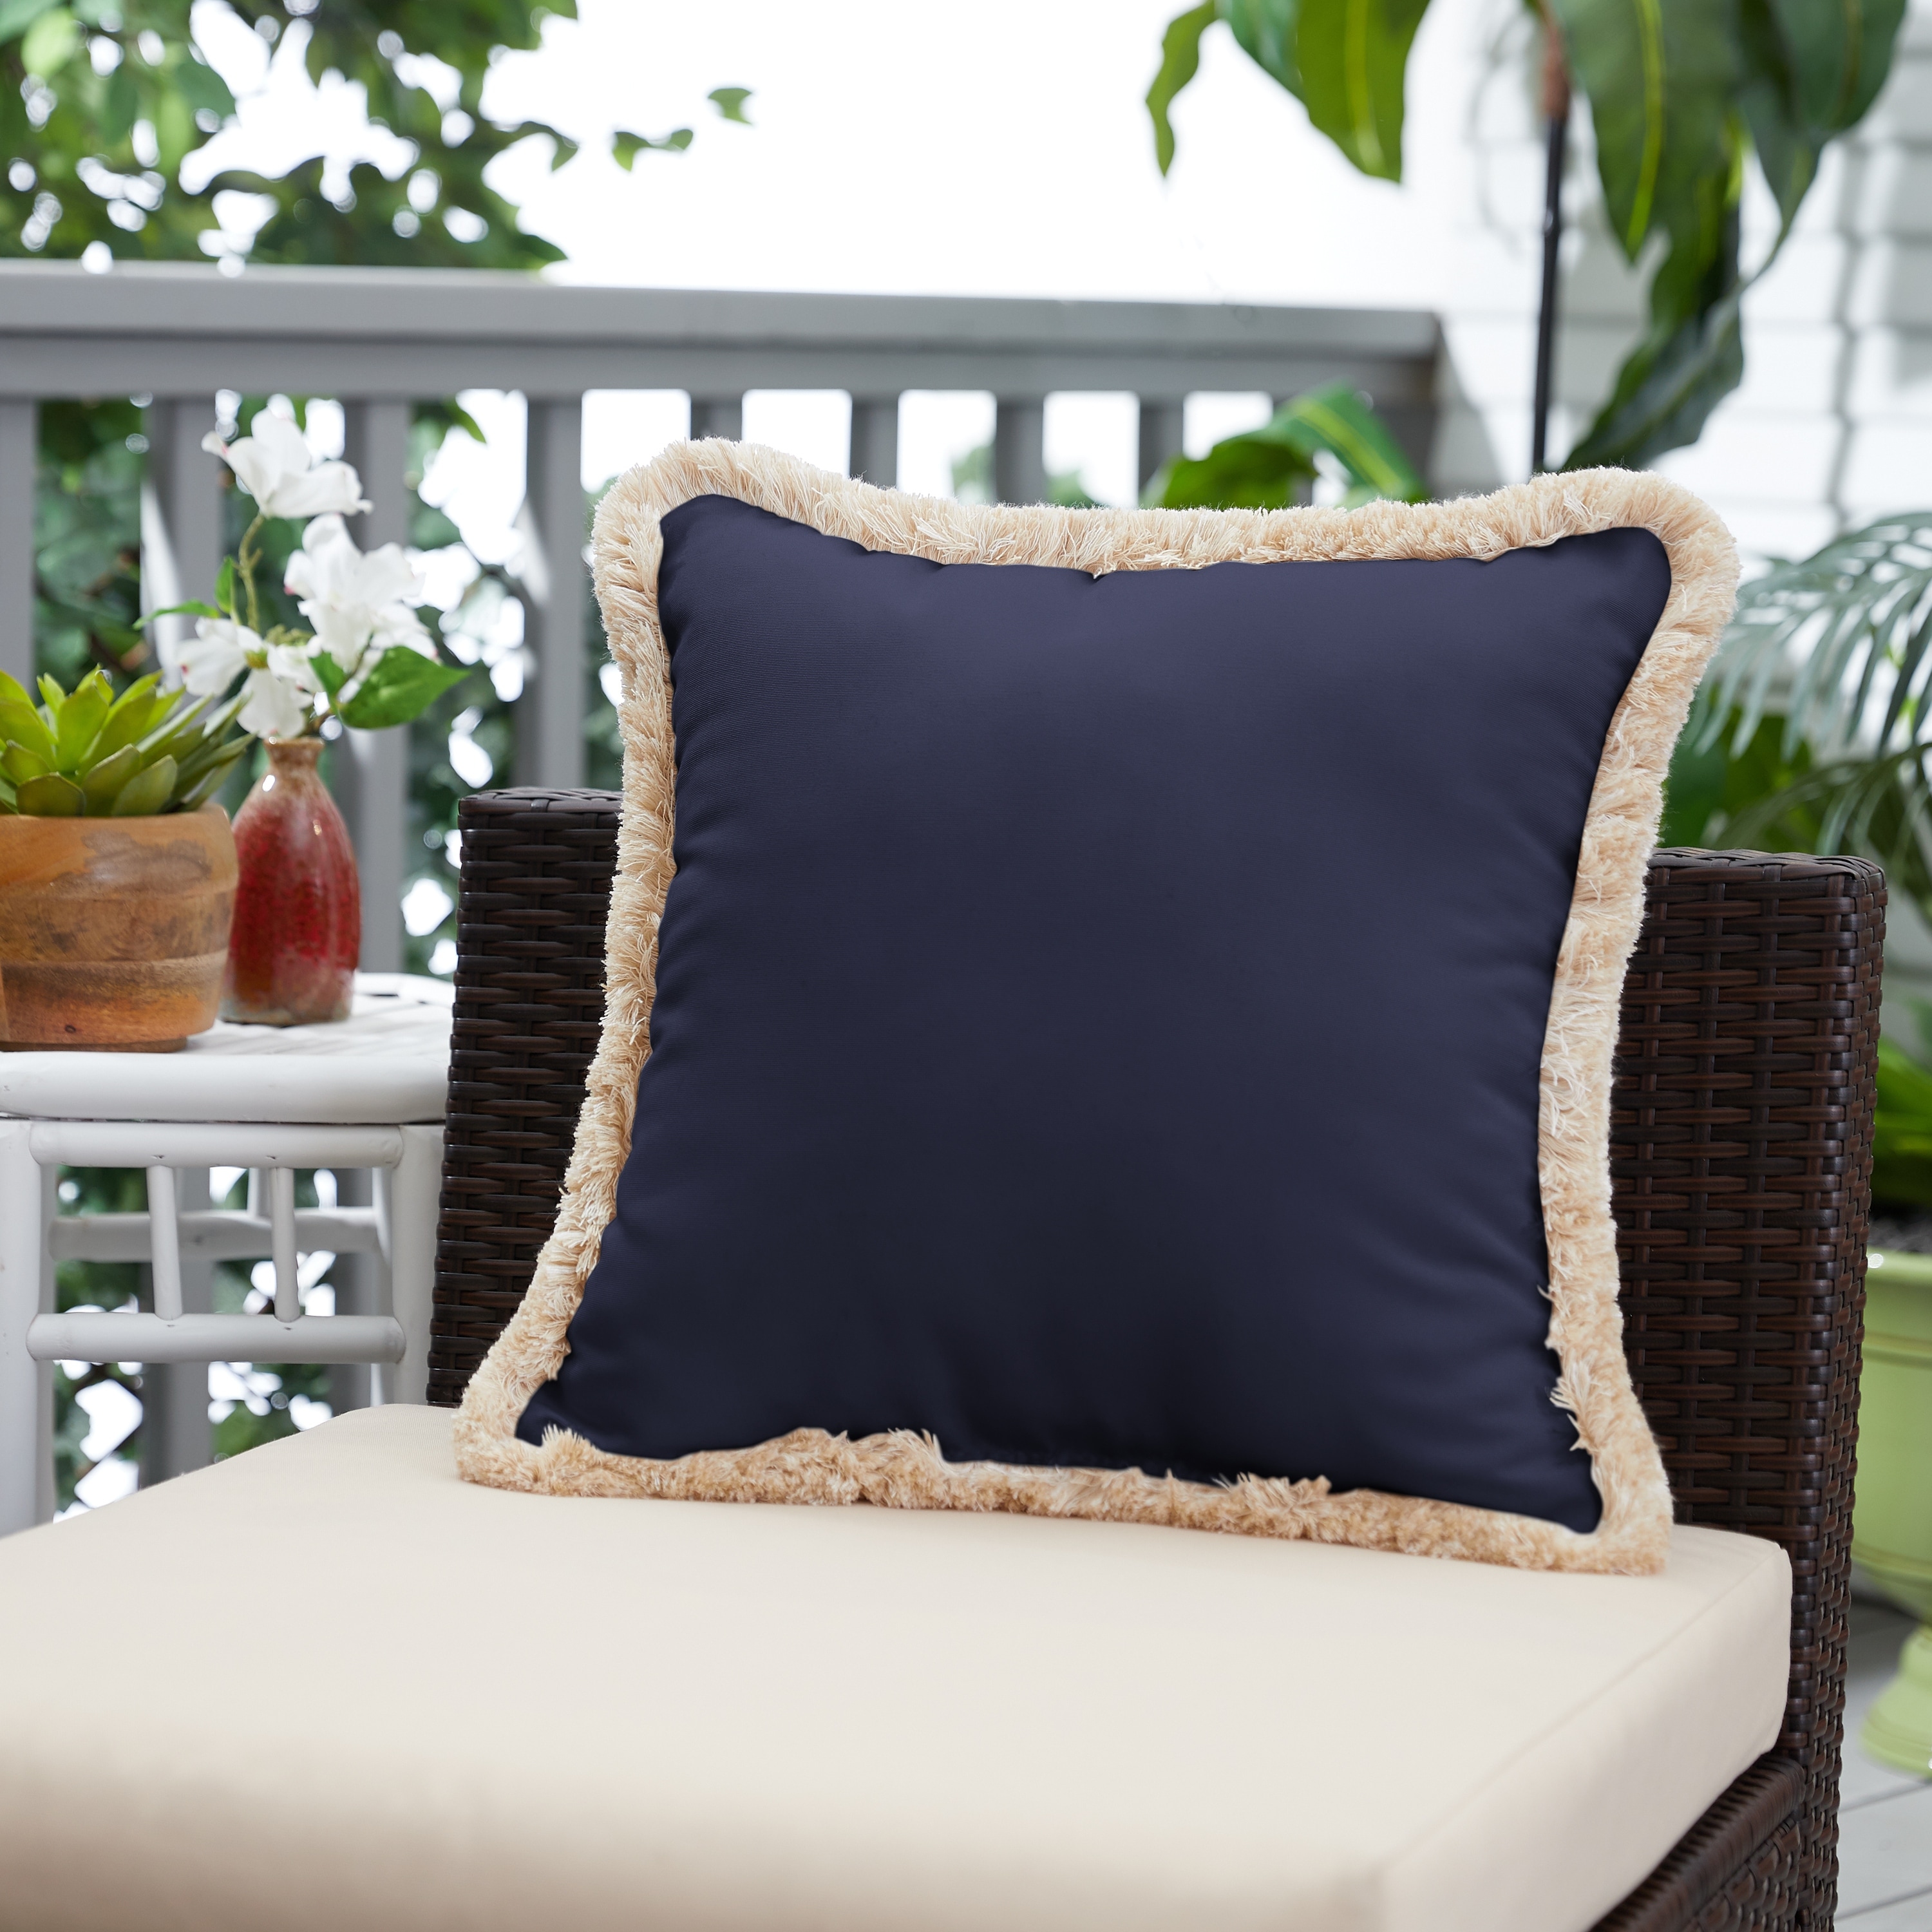 https://ak1.ostkcdn.com/images/products/is/images/direct/1c711f8a66549bec850cf48e88bc04cb8d8b1ca1/Sunbrella-Canvas-Navy-Indoor--Outdoor-Square-Pillow-with-Fringe.jpg